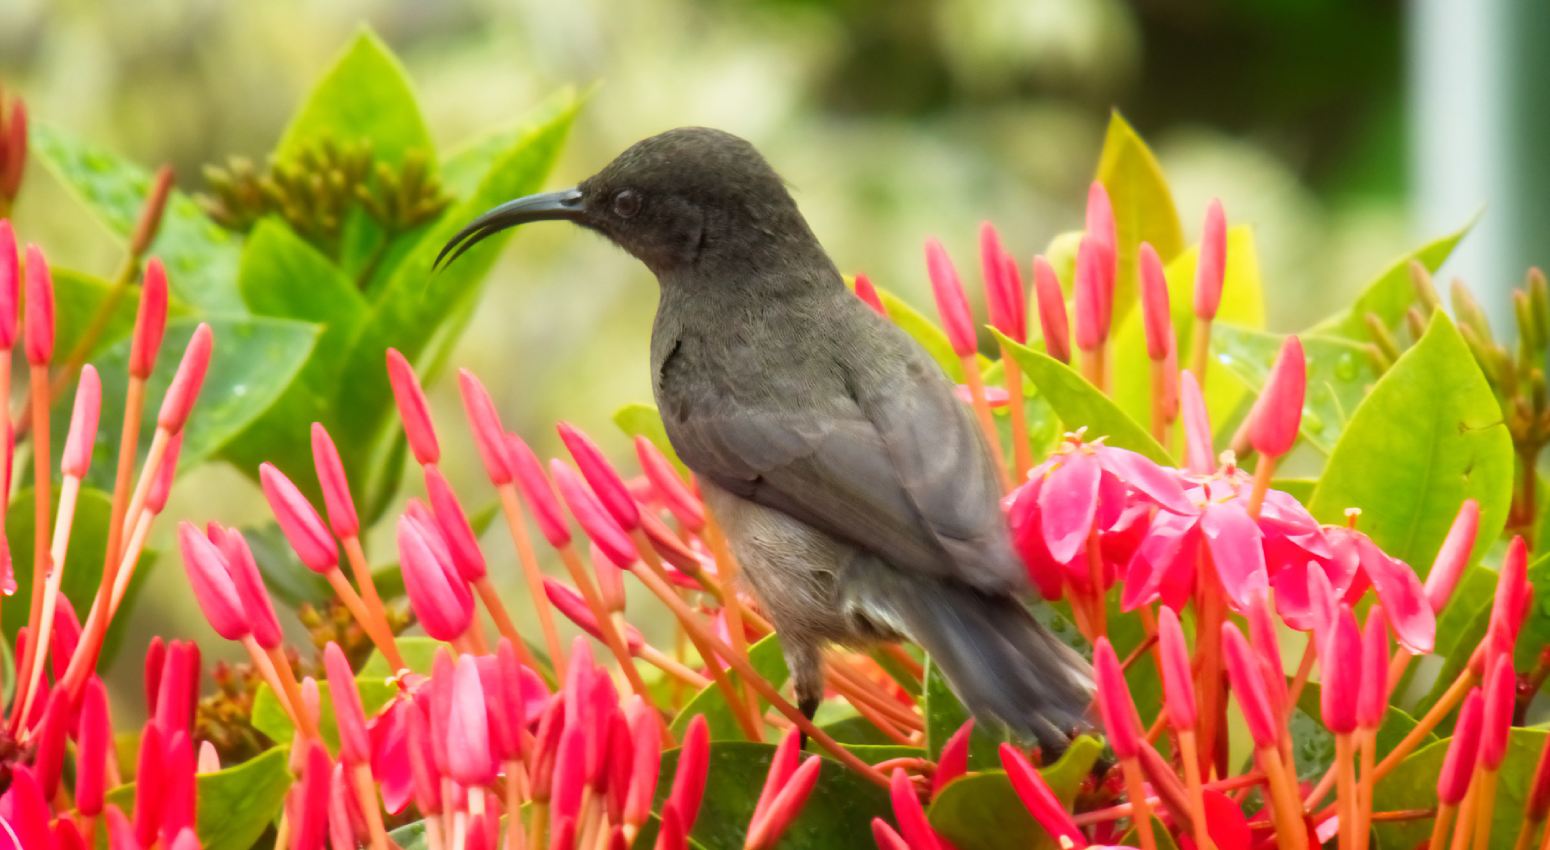 A sunbird perched on a branch